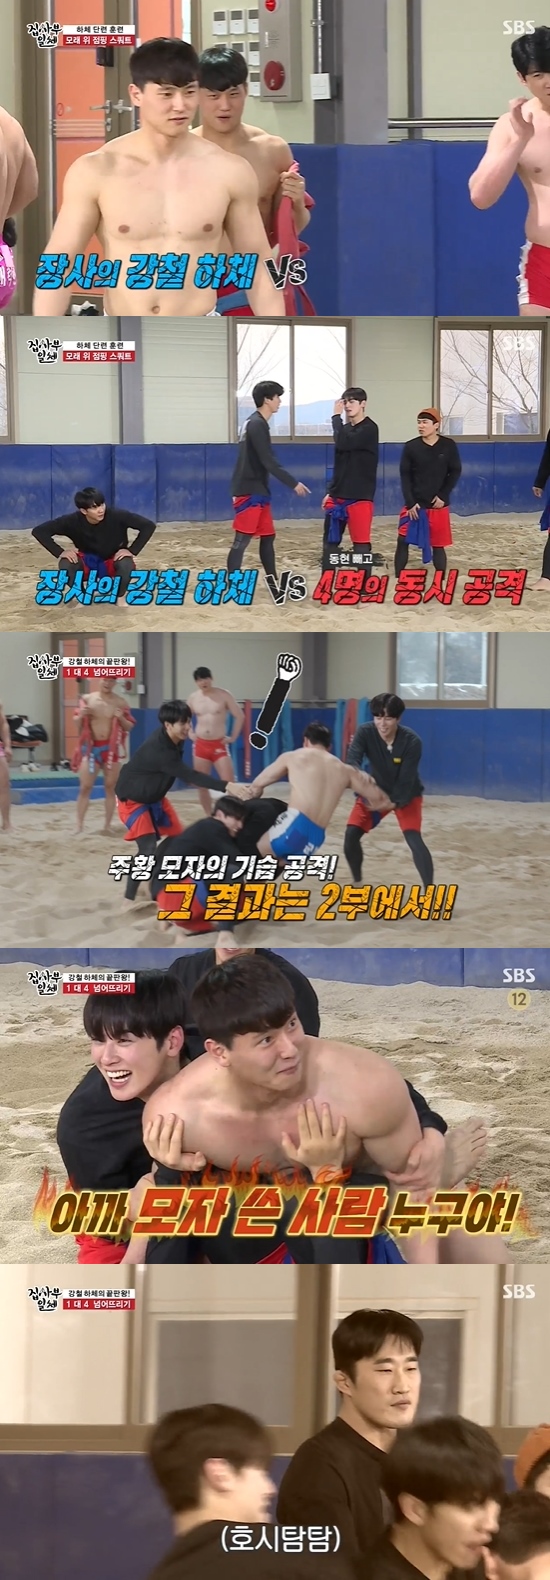 On SBS All The Butlers broadcast on the 24th, Jung Eun-woo, Shin Sung-rok, Lee Seung-gi, Yang Se-hyeong and Kim Dong-Hyun played wrestling battle.On the day, the crew attached a number sticker to the members, and Jung Eun-woo speculated, Are you wrestling with a ladder ride?The meaning of the number is the expected ranking of the members selected by the master.Starting with Kim Dong-Hyun, Lee Seung-gi, Jung Eun-woo, Shin Sung-rok, and Yang Se-hyeong were in order.If you do with a wrestler, you can win, Cha Jung Eun-woo asked Kim Dong-Hyun, but Kim Dong-Hyun said, Just lose.Lee Seung-gi said, Personally, the most scary opponent is Jung Eun-woo.Then came the youngest Taebaek in the 2000s, Heo Seon-haeng, Taebaek, Taebaek, and David of Ssireum, and Im tae-hyuk.Shin Sung-rok was surprised, saying, I first knew that the wrestlers bodies were like sculptures.Lee Seung-gi referred to the nickname of Night If, David of the Wrestling.Night if said, The fans built it, its embarrassing, but Noh Bum-soo, heo Seon-haeng and im tae-hyuk said Night if likes it.Heo Seon-haeng said of im tae-hyuk: Im an entertainer in a wrestling version; Im really good at wrestling.When I was a child, I thought Tae Hyuk wanted to be like that while watching his brothers video. Night if said, I am not. When asked if the Vic-Fezensac title was great, im tae-hyuk, who shined in the 17th Vic-Fezensac title, said, I think it is great to go over ten.I did it 17 times. It is the most active.In the meantime, the basic training of wrestling began. After the rope-riding training, the lower body training that Night if actually did began. It was a jumping squat.Kim Dong-Hyun said, Its already hard? As soon as I started, I felt that it was a hell training.Lee Seung-gi was caught turning in the other direction, and the members had to start the jumping squat from the beginning because of Lee Seung-gi.Kim Dong-Hyun laughed, saying, Why should someone else avoid it? We were doing well.Members appealed, The legs dont move.Lee Seung-gi said, I wanted to be able to do it until I did five, but suddenly I felt like someone was holding down from the bottom.Kim Dong-Hyun asked Night if he should not fall down if he sticks to a few people, and Night if said, I think it will be possible for three to four people.Shin Sung-rok, Lee Seung-gi, Yang Se-hyeong, and Jung Eun-woo stuck to knock the Night if.Rather, Night if put the technology on Lee Seung-gi, but not long after, Night if fell; Night if said, Whos the hat?Its a lot of power, surprised Kim Dong-Hyun, who sneaked in wearing Yang Se-hyeongs hat.The masters then chose a member to coach one-on-one.Im tae-hyuk chose Jung Eun-woo, Night if Shin Sung-rok, and Noh Beom-su chose Yang Se-hyeong.The situation remains only Choices of heo Seon-haeng.Lee Seung-gi appealed, I will make you Master Vic-Fezensac, and Kim Dong-Hyun said, Is not it energy to teach others?Ill rest and burn you a horse, said Choices of heo Seon-haeng, who was Lee Seung-gi.Im tae-hyuk passed the left-hander technique to a good-core car, Jung Eun-woo, who admired it as burning.No Beom-soo told Yang Se-hyeong how to overcome weight-weight car. It was a Qi Qi technology.This Night if explained to Shin Sung-rok how to cope with Qi Qi per penny.On the other hand, heo Seon-haeng told Lee Seung-gi, You dont need that number of fights, you just have to do the field legs at the same time that you start, I did it with Vic-Fezensac.Kim Dong-Hyun went around and watched the members practice and taught himself.The All The Butlers ship Vic-Fezensac Ssireum competition began; first, Lee Seung-gi and Yang Se-hyeongs Battle.Lee Seung-gi won in three seconds with a field leg; then Shin Sung-rok and Jung Eun-woos Battle.Shin Sung-rok, who everyone expected to win the Shin Sung-rok, who took deep into the scourge, failed to get up and sat down; the game started with a full posture again.It was a victory for Jung Eun-woo, who responded by turning Shin Sung-roks left-back over.Come up whoever you are, Ill answer with my field legs, said Lee Seung-gi, who advanced to the final with a minor victory.Kim Dong-Hyun and Jung Eun-woo won Battle.When Jung Eun-woo was in the center, Kim Dong-Hyun attacked, and Jung Eun-woo held on and eventually fell.Finally, the final between Lee Seung-gi and Kim Dong-Hyun; Lee Seung-gi constantly put on field bridge skills, but Kim Dong-Hyun hit back.Heo Seon-haeng said Kim Dong-Hyuns knee was first touched, and VAR readings began; it was Kim Dong-Hyuns first win.In the second Battle, Lee Seung-gi finally passed Kim Dong-Hyun over to the field bridge - and the last Battle.When Kim Dong-Hyun pulled his hand off the scourge, Lee Seung-gi put on a field bridge technique, but Kim Dong-Hyun won by pushing Lee Seung-gi in the moment.Kim Dong-Hyun received a gold calf/ Photo = SBS broadcast screen